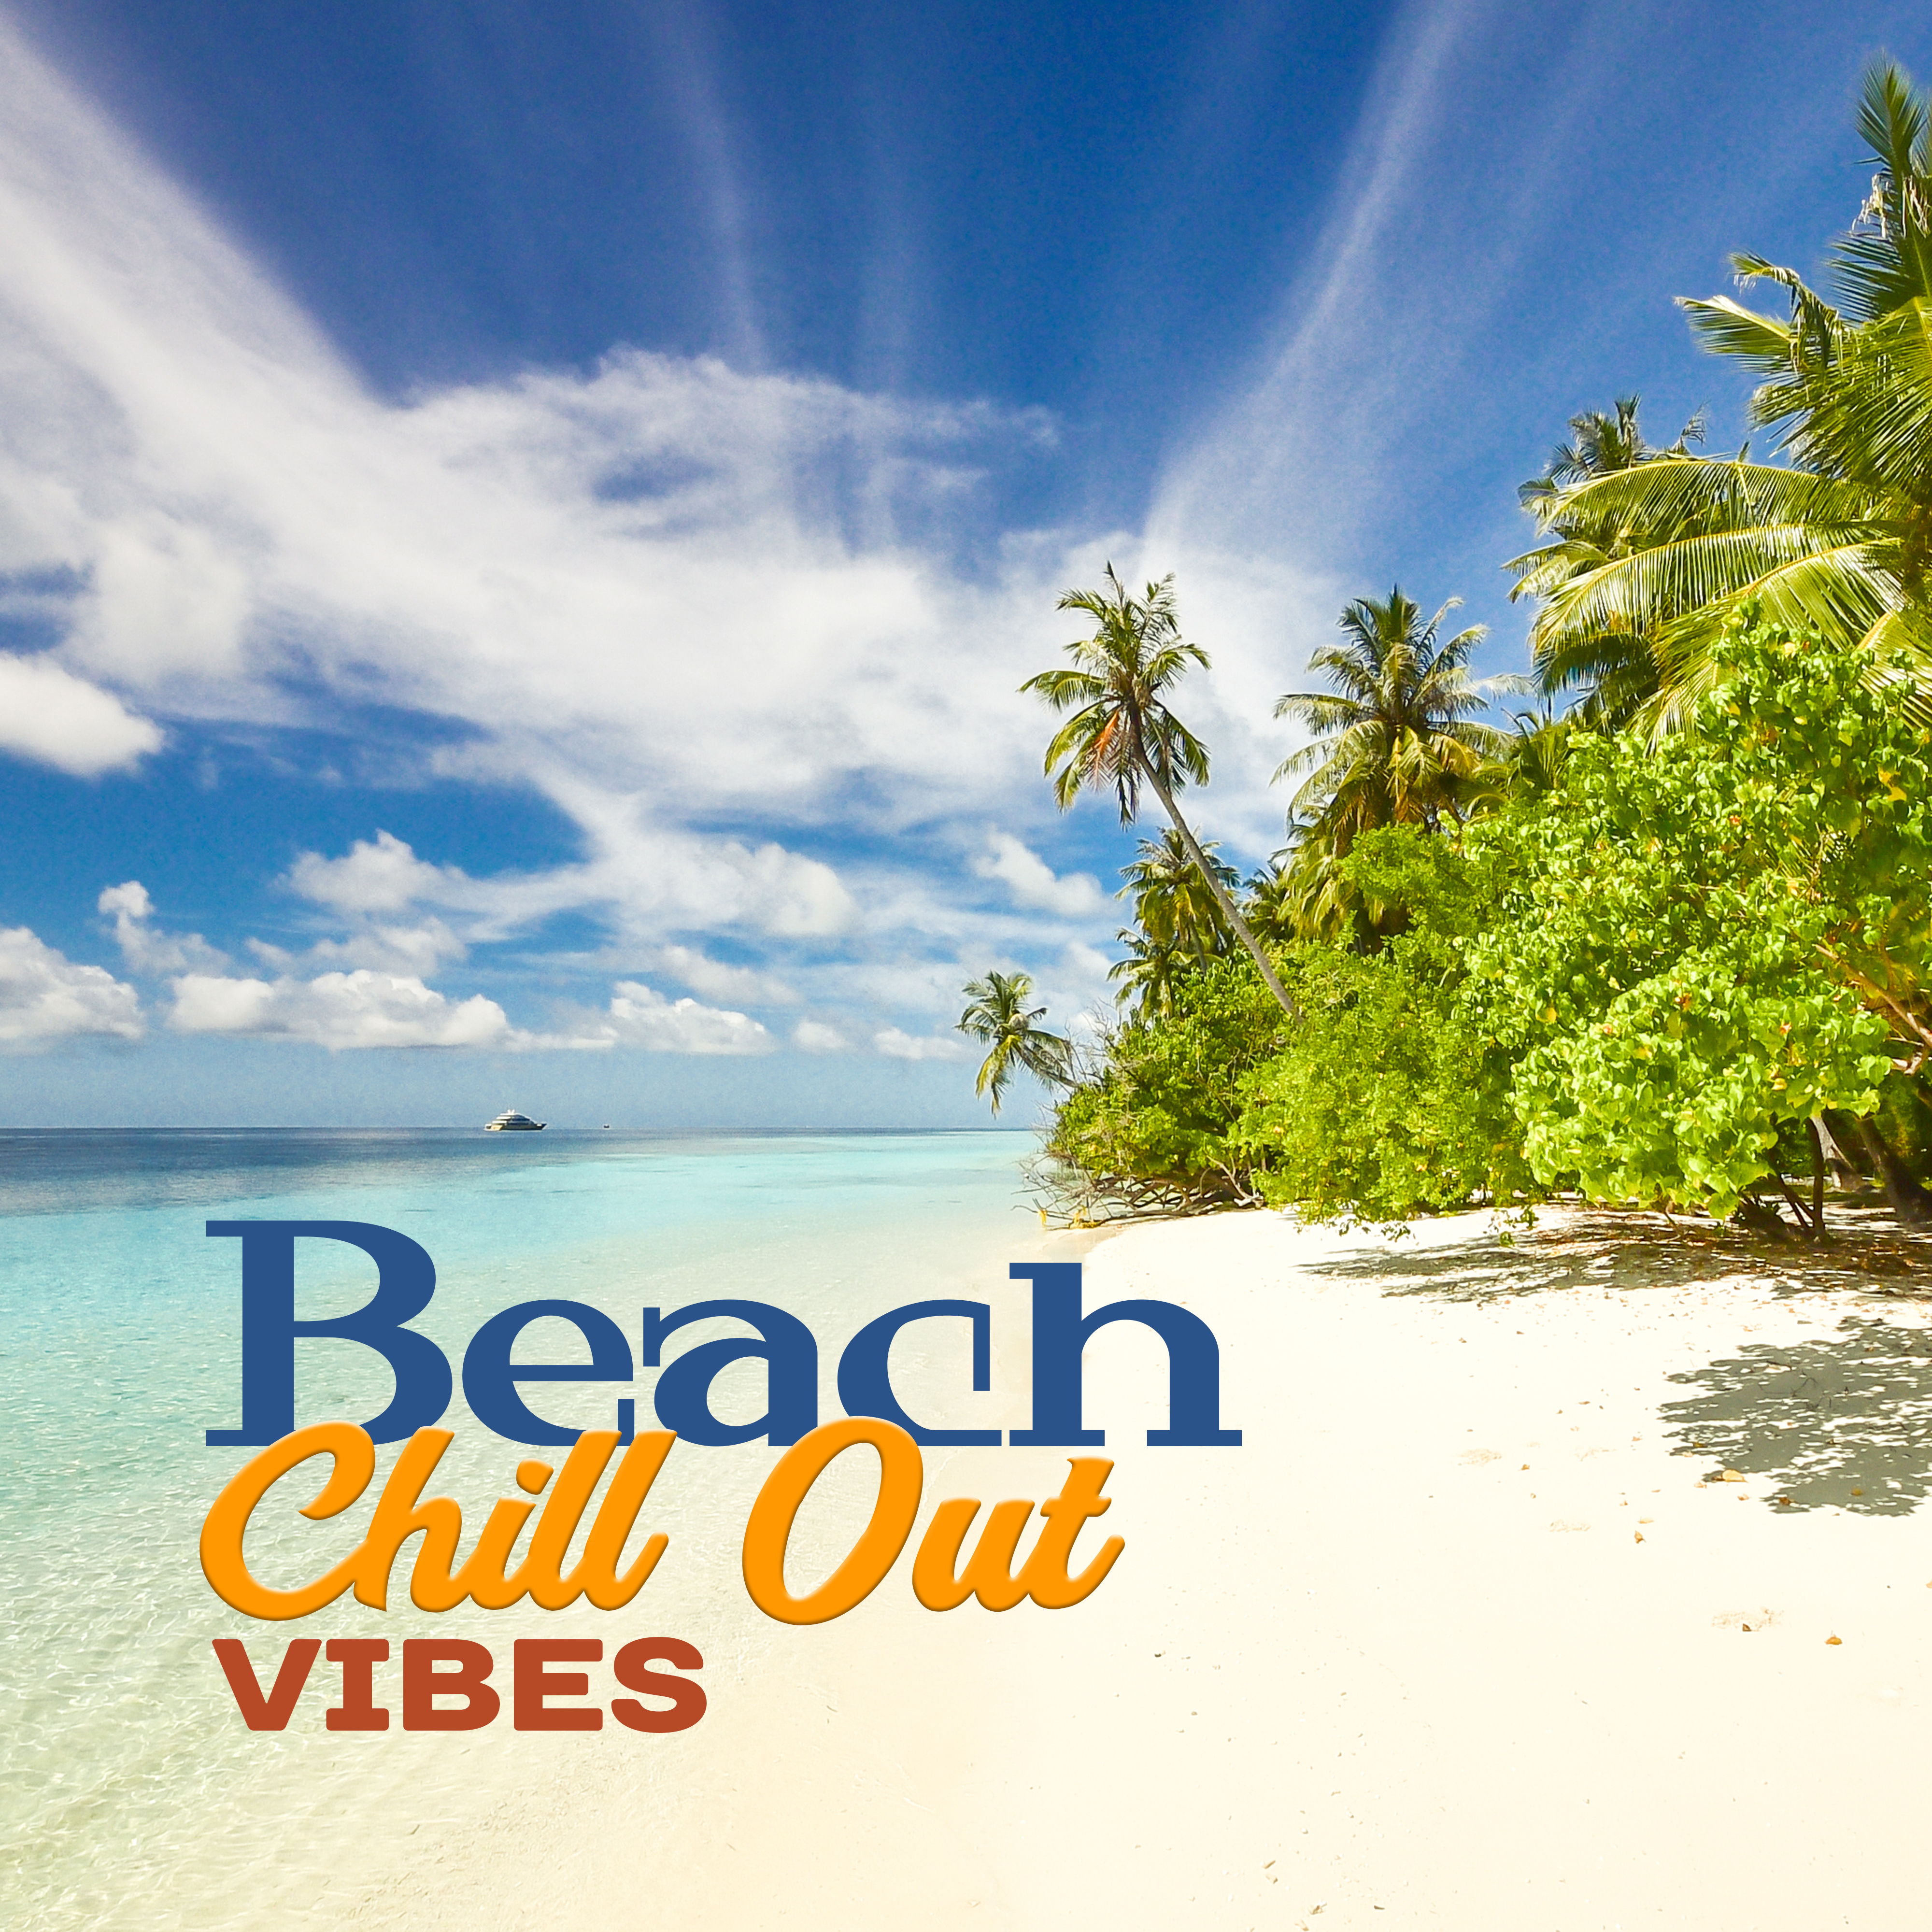 Beach Chill Out Vibes – Beach Relaxation, Summer Music, Rest on the Beach, Coast Vibes